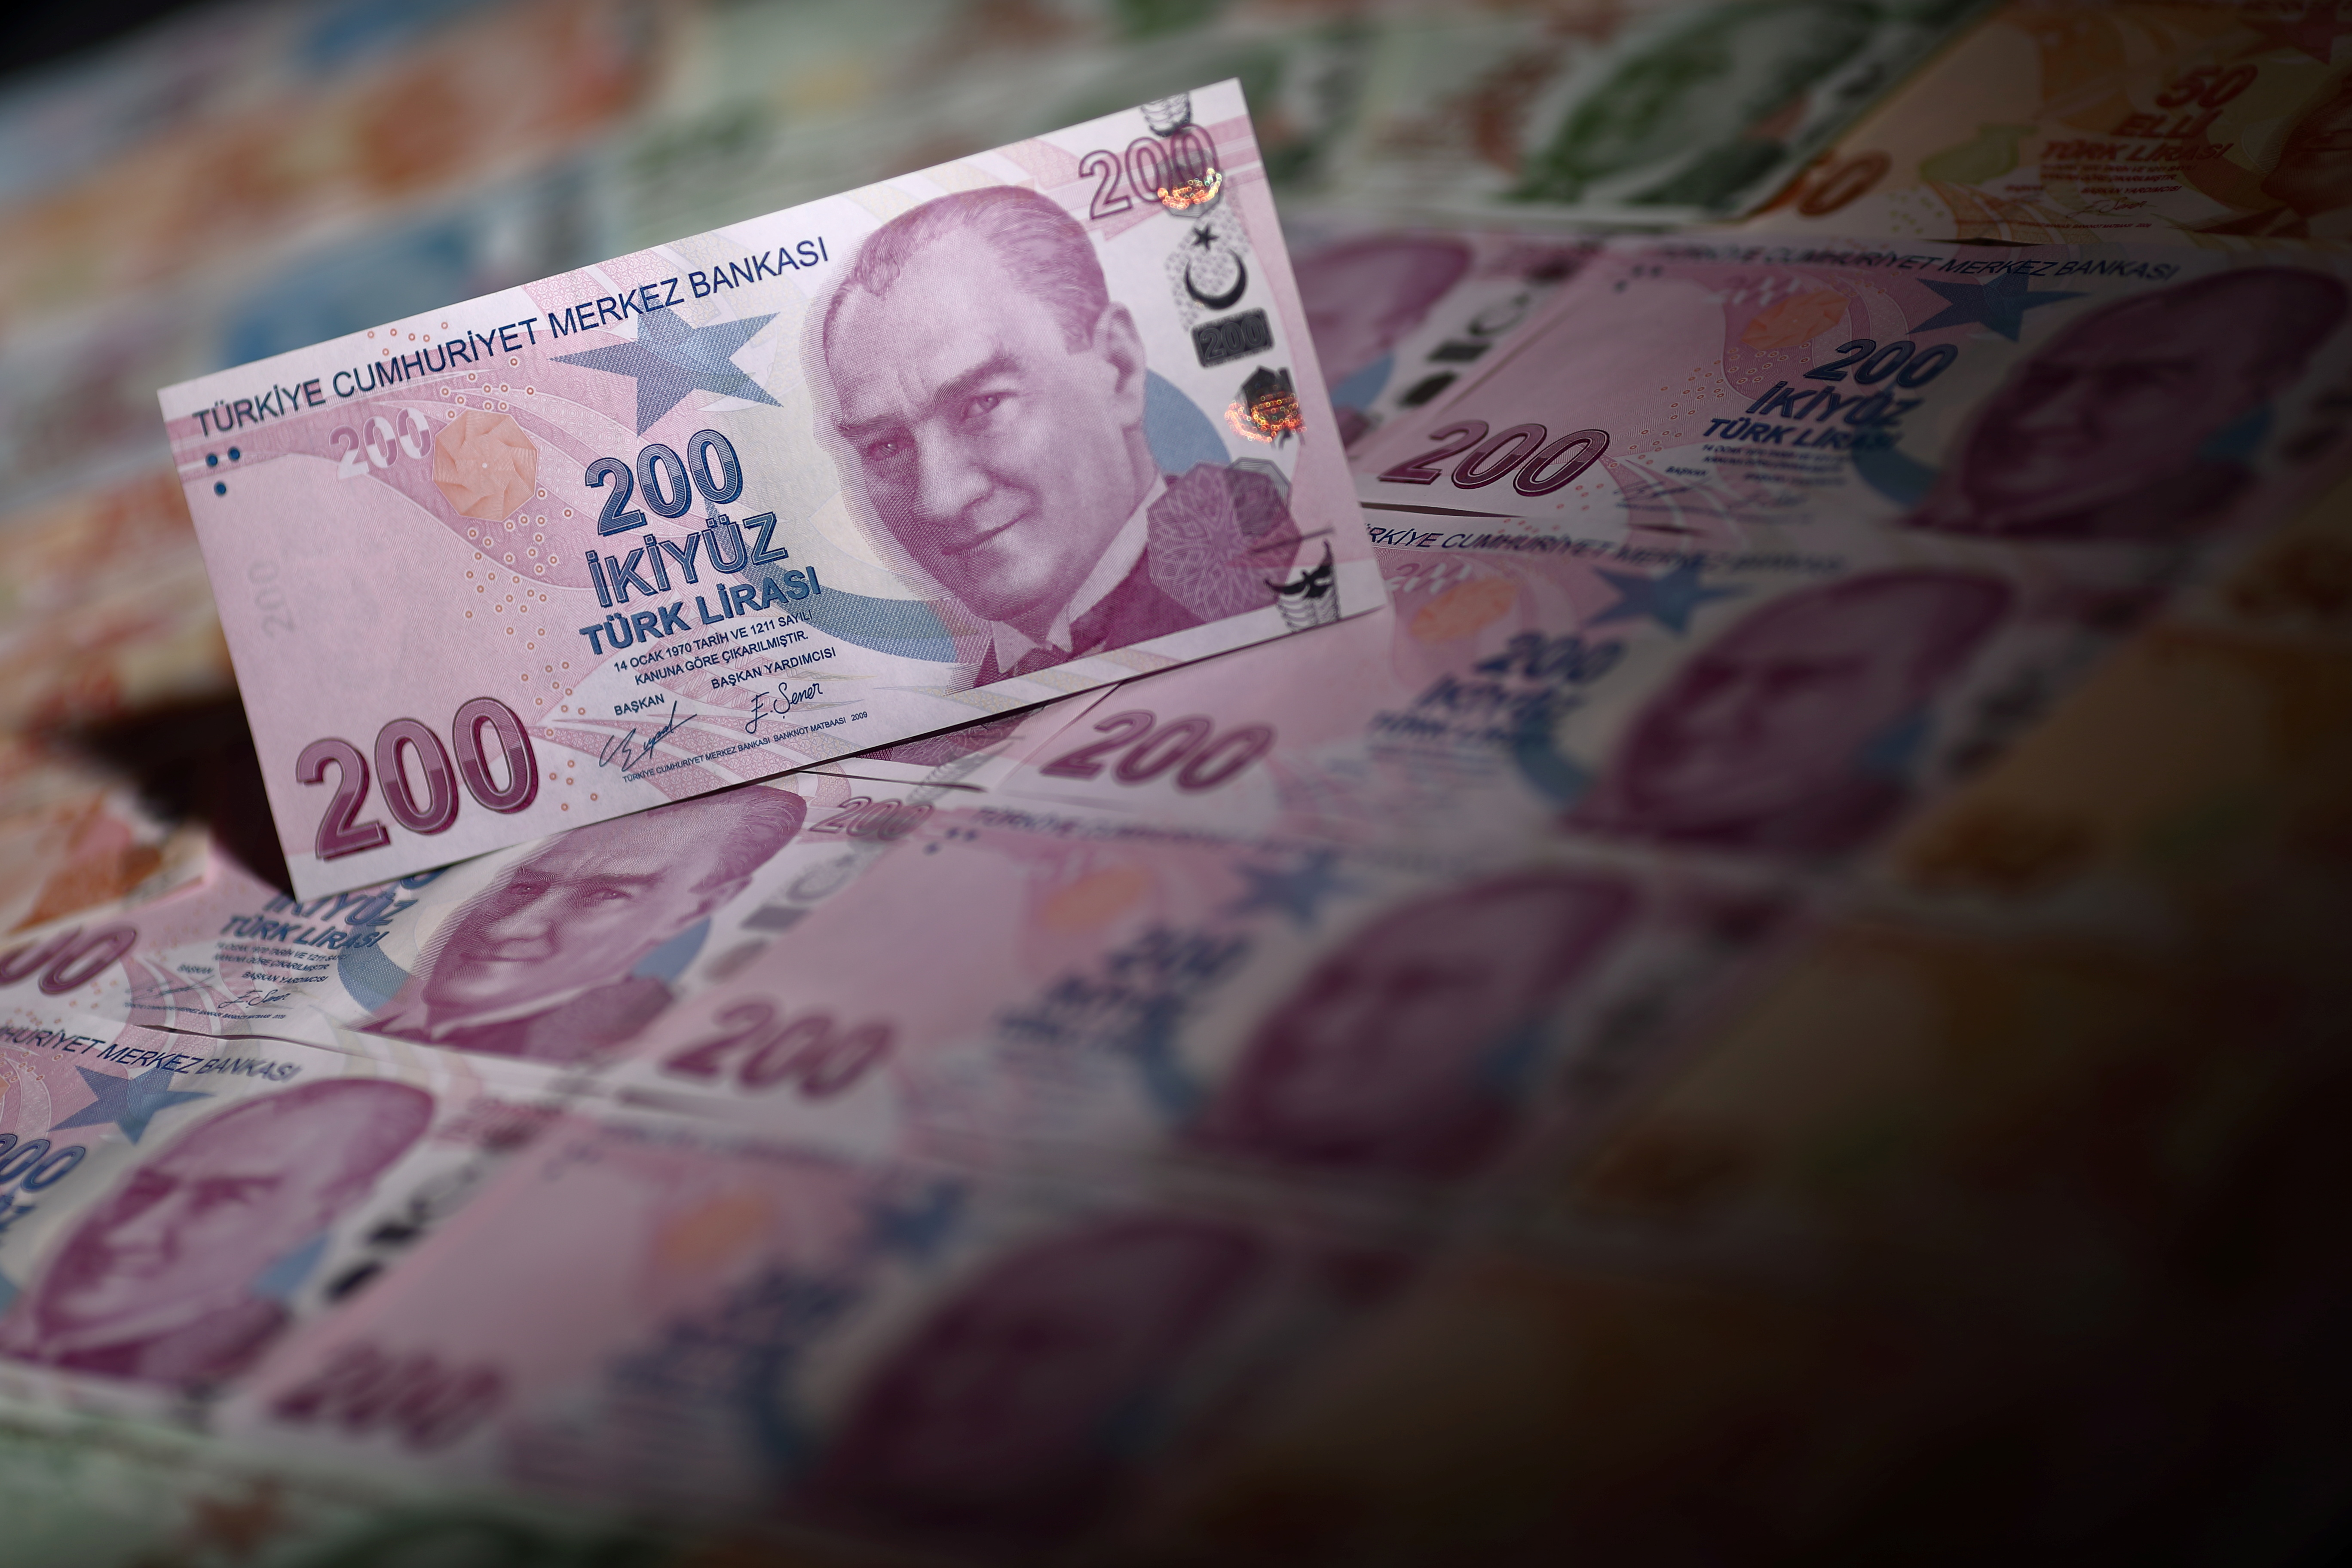 Turkish lira banknotes are seen in this illustration